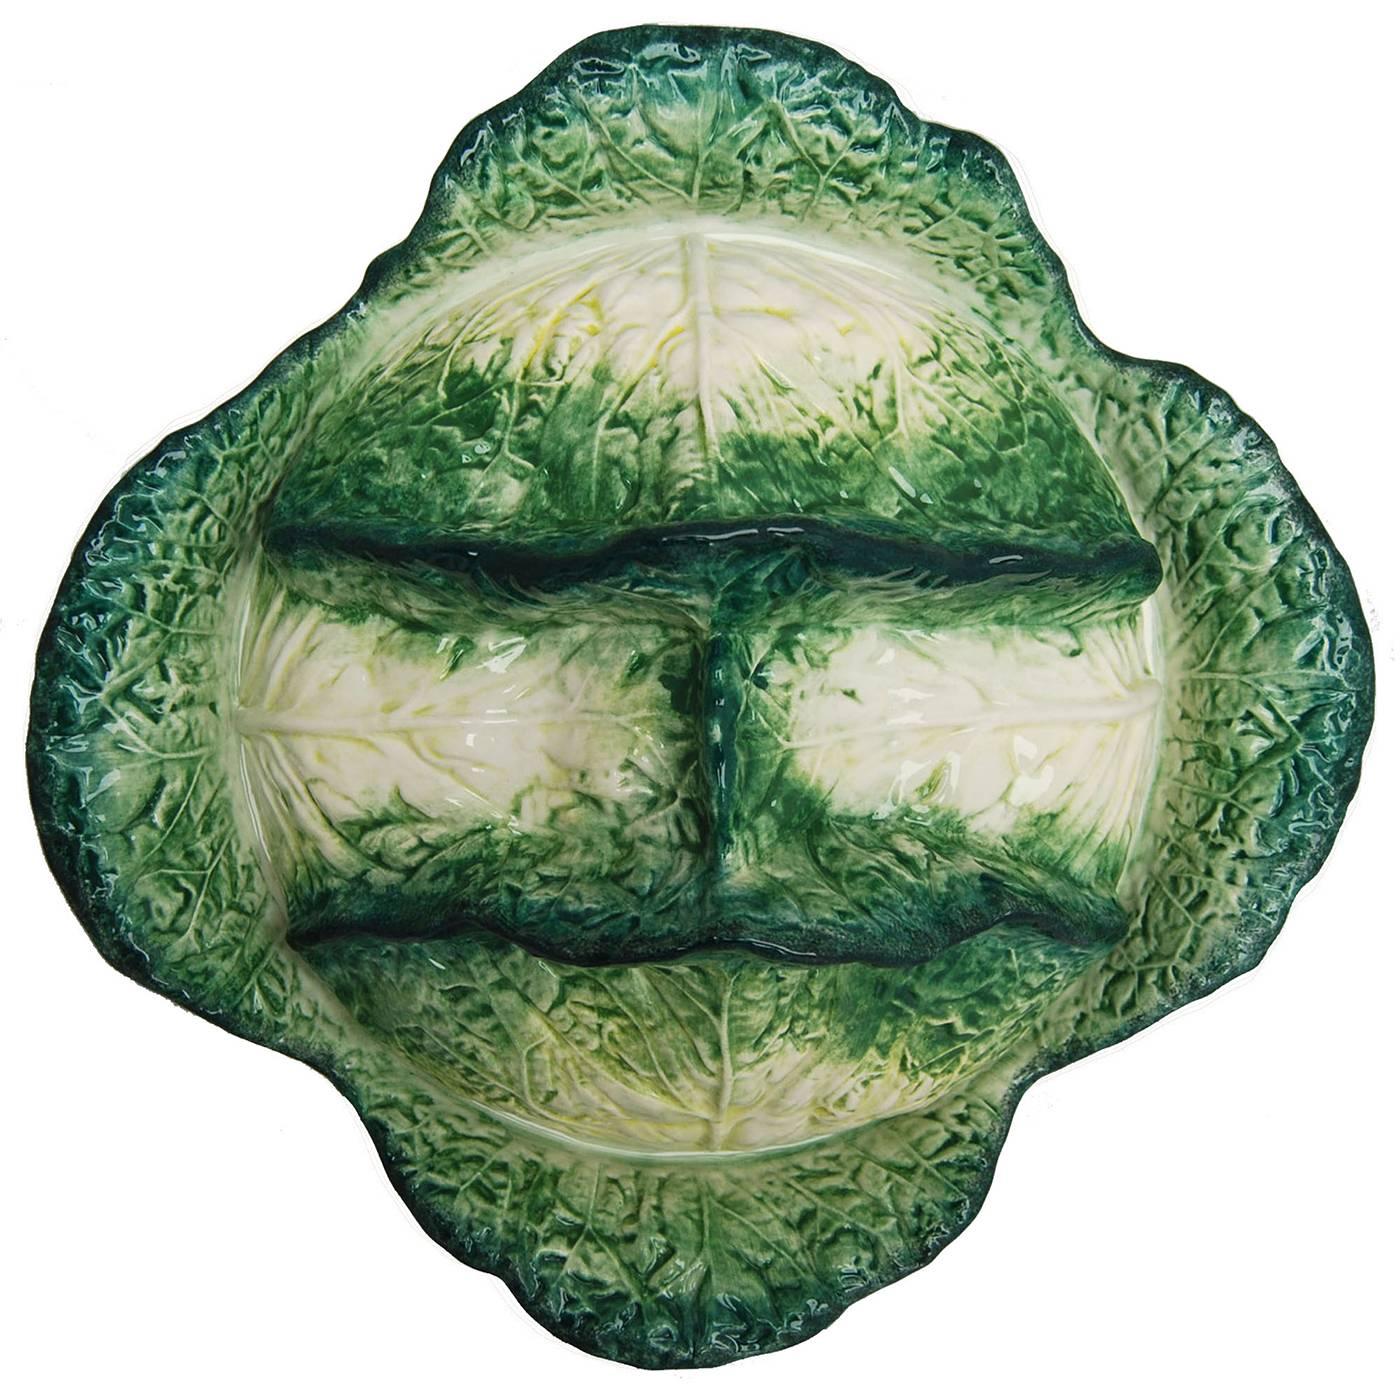 Ceramic soup tureen shaped like a Savoy cabbage and functionally executed with the “vegetable” adequately placed inside a basket-shaped bowl with the same texture. The piece is crafted and painted by hand by the master ceramic artists in the